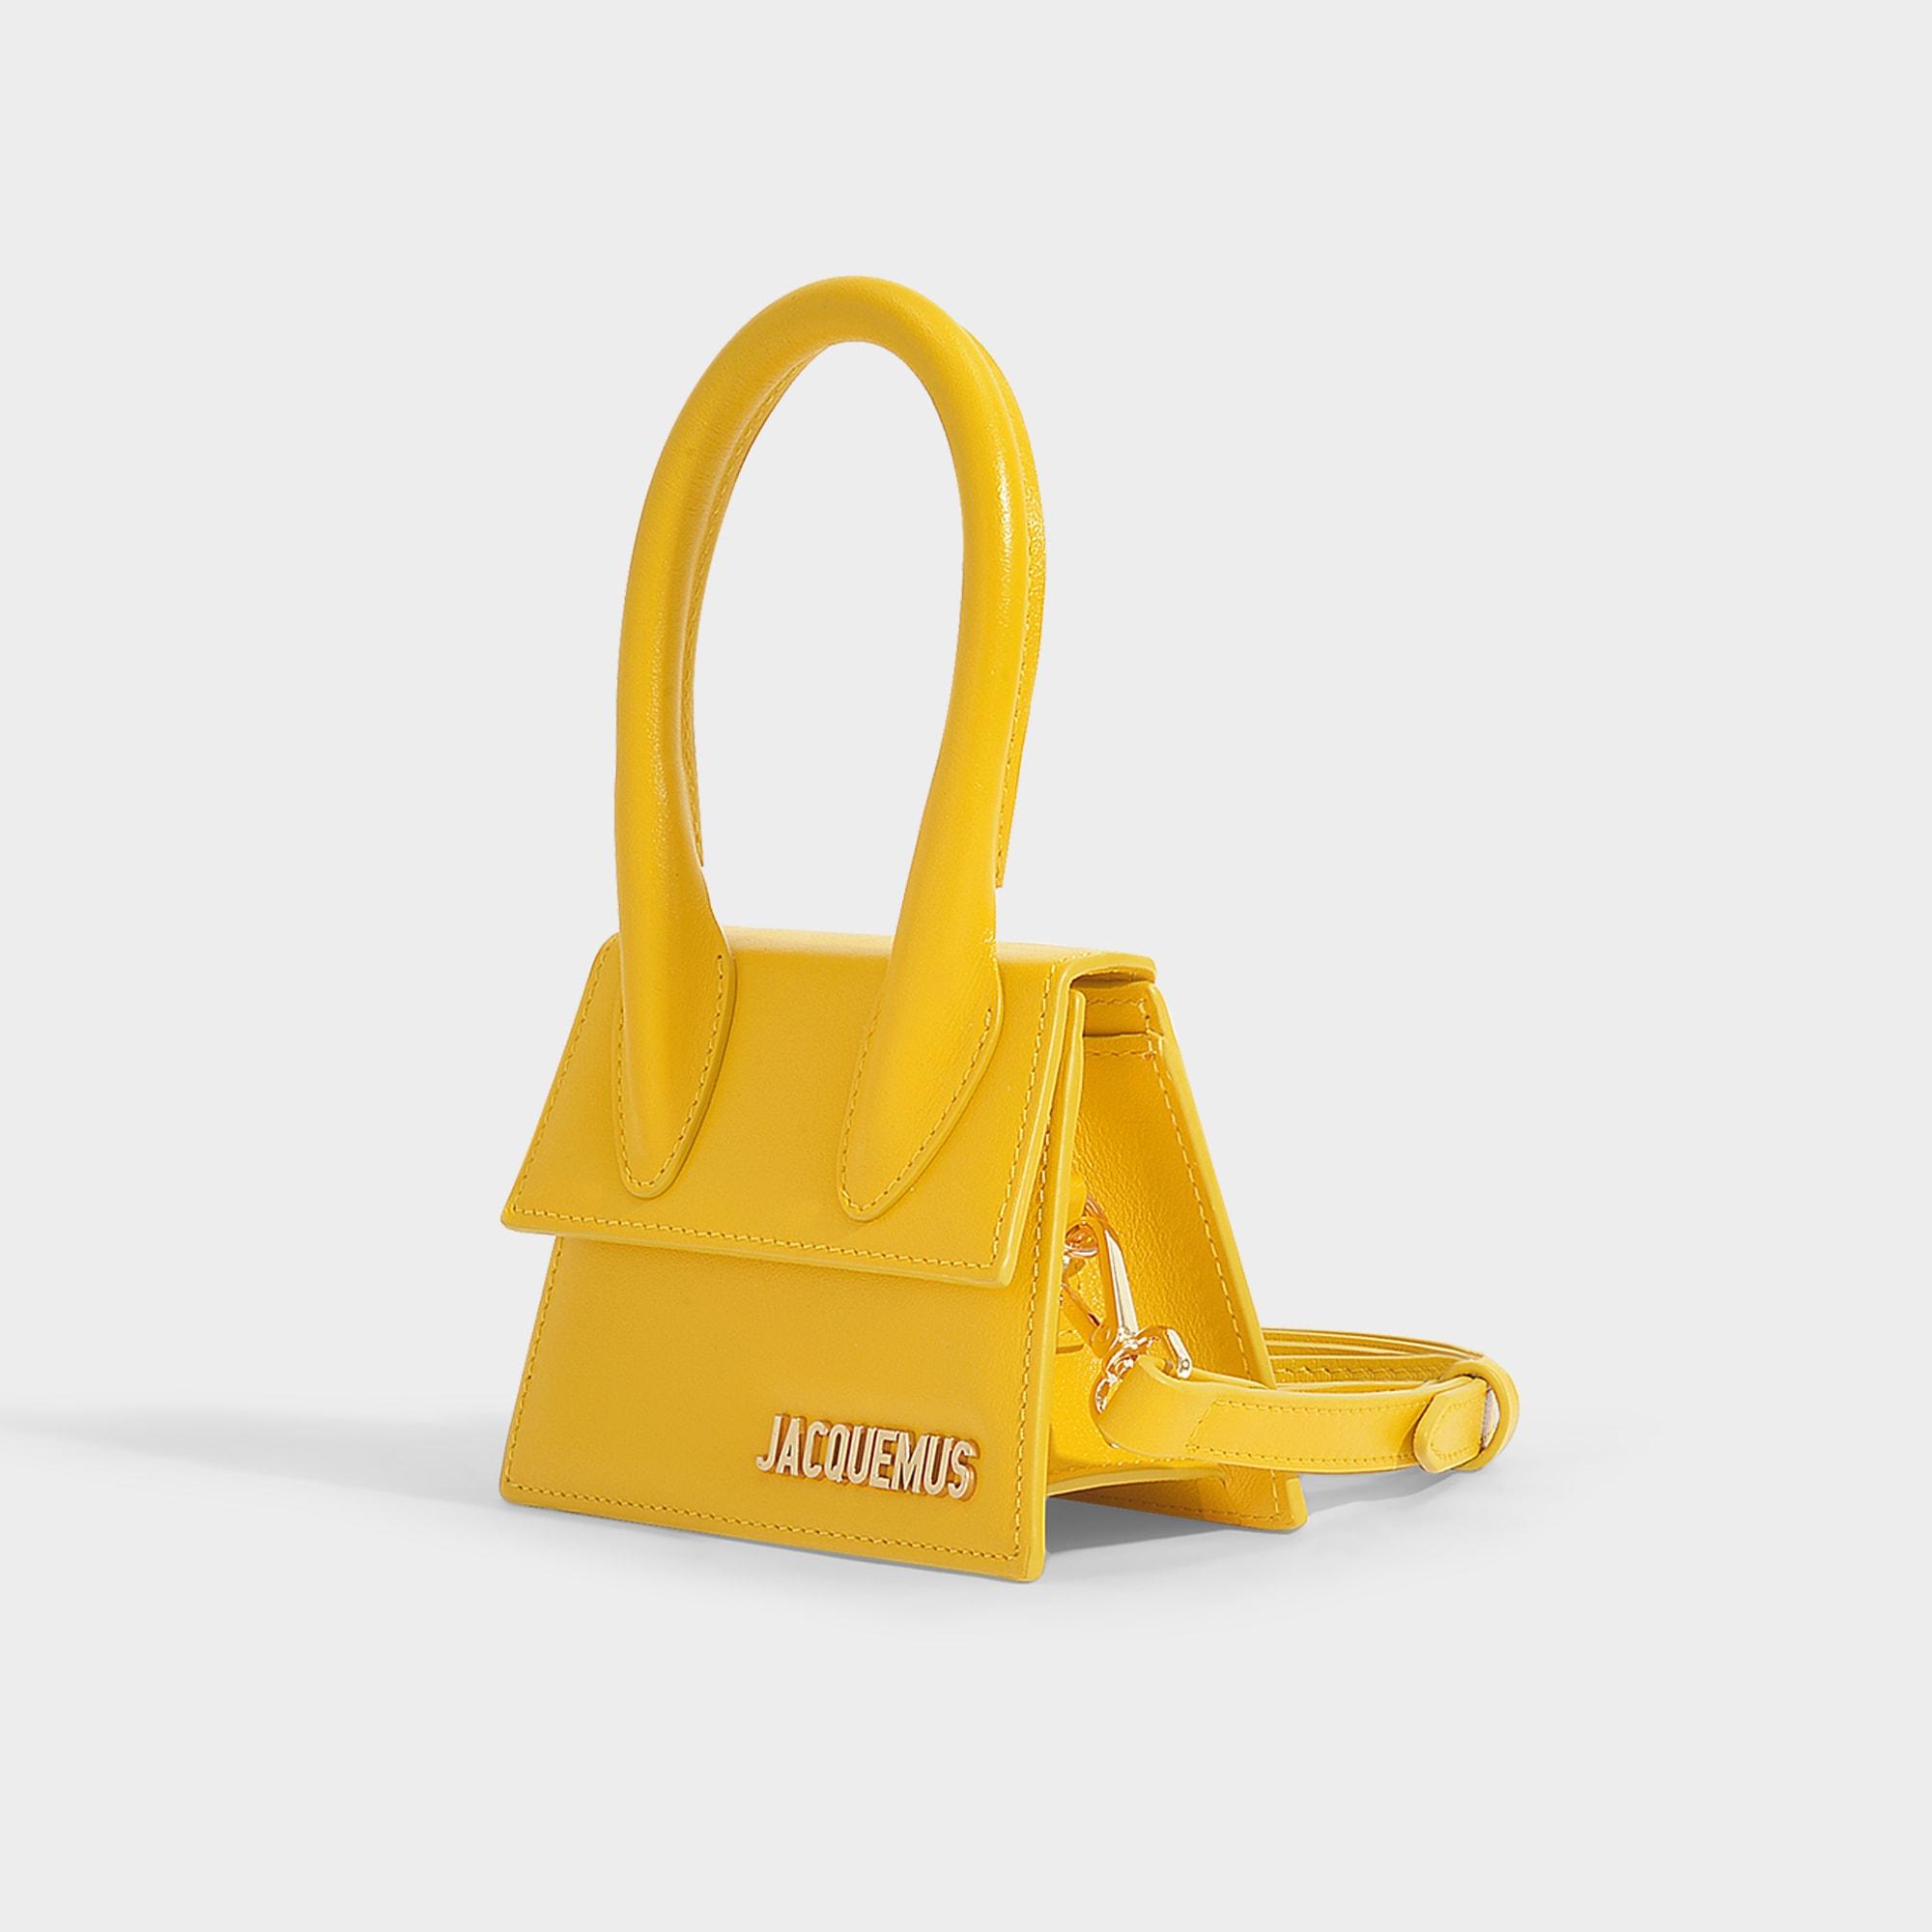 Jacquemus Le Chiquito Handbag In Yellow Leather in Yellow - Lyst